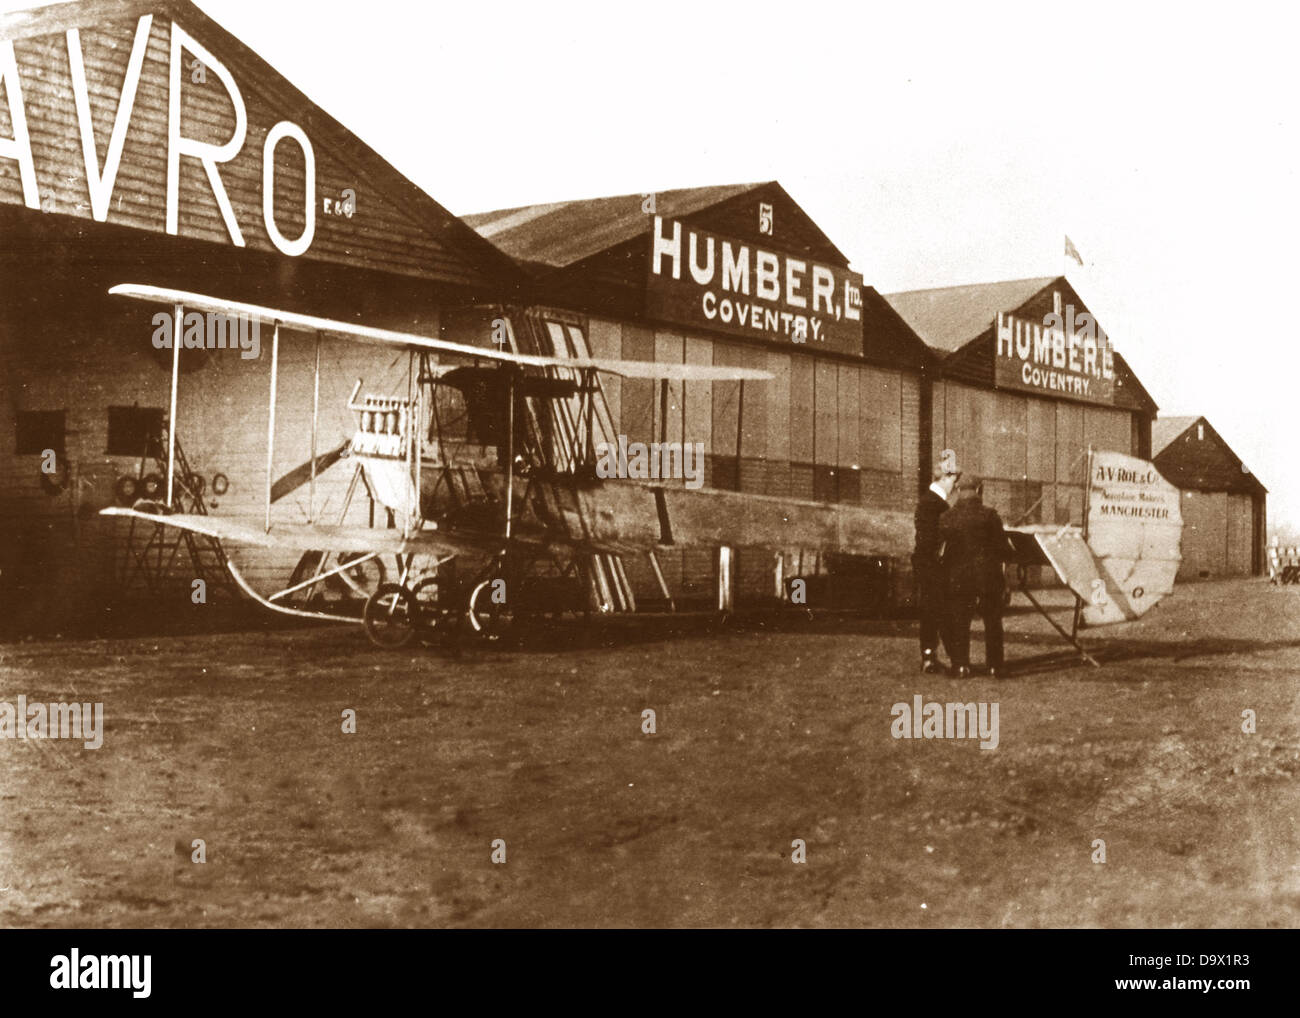 AVRO Duigan Biplane, Humber Works, Coventry early 1900s Stock Photo